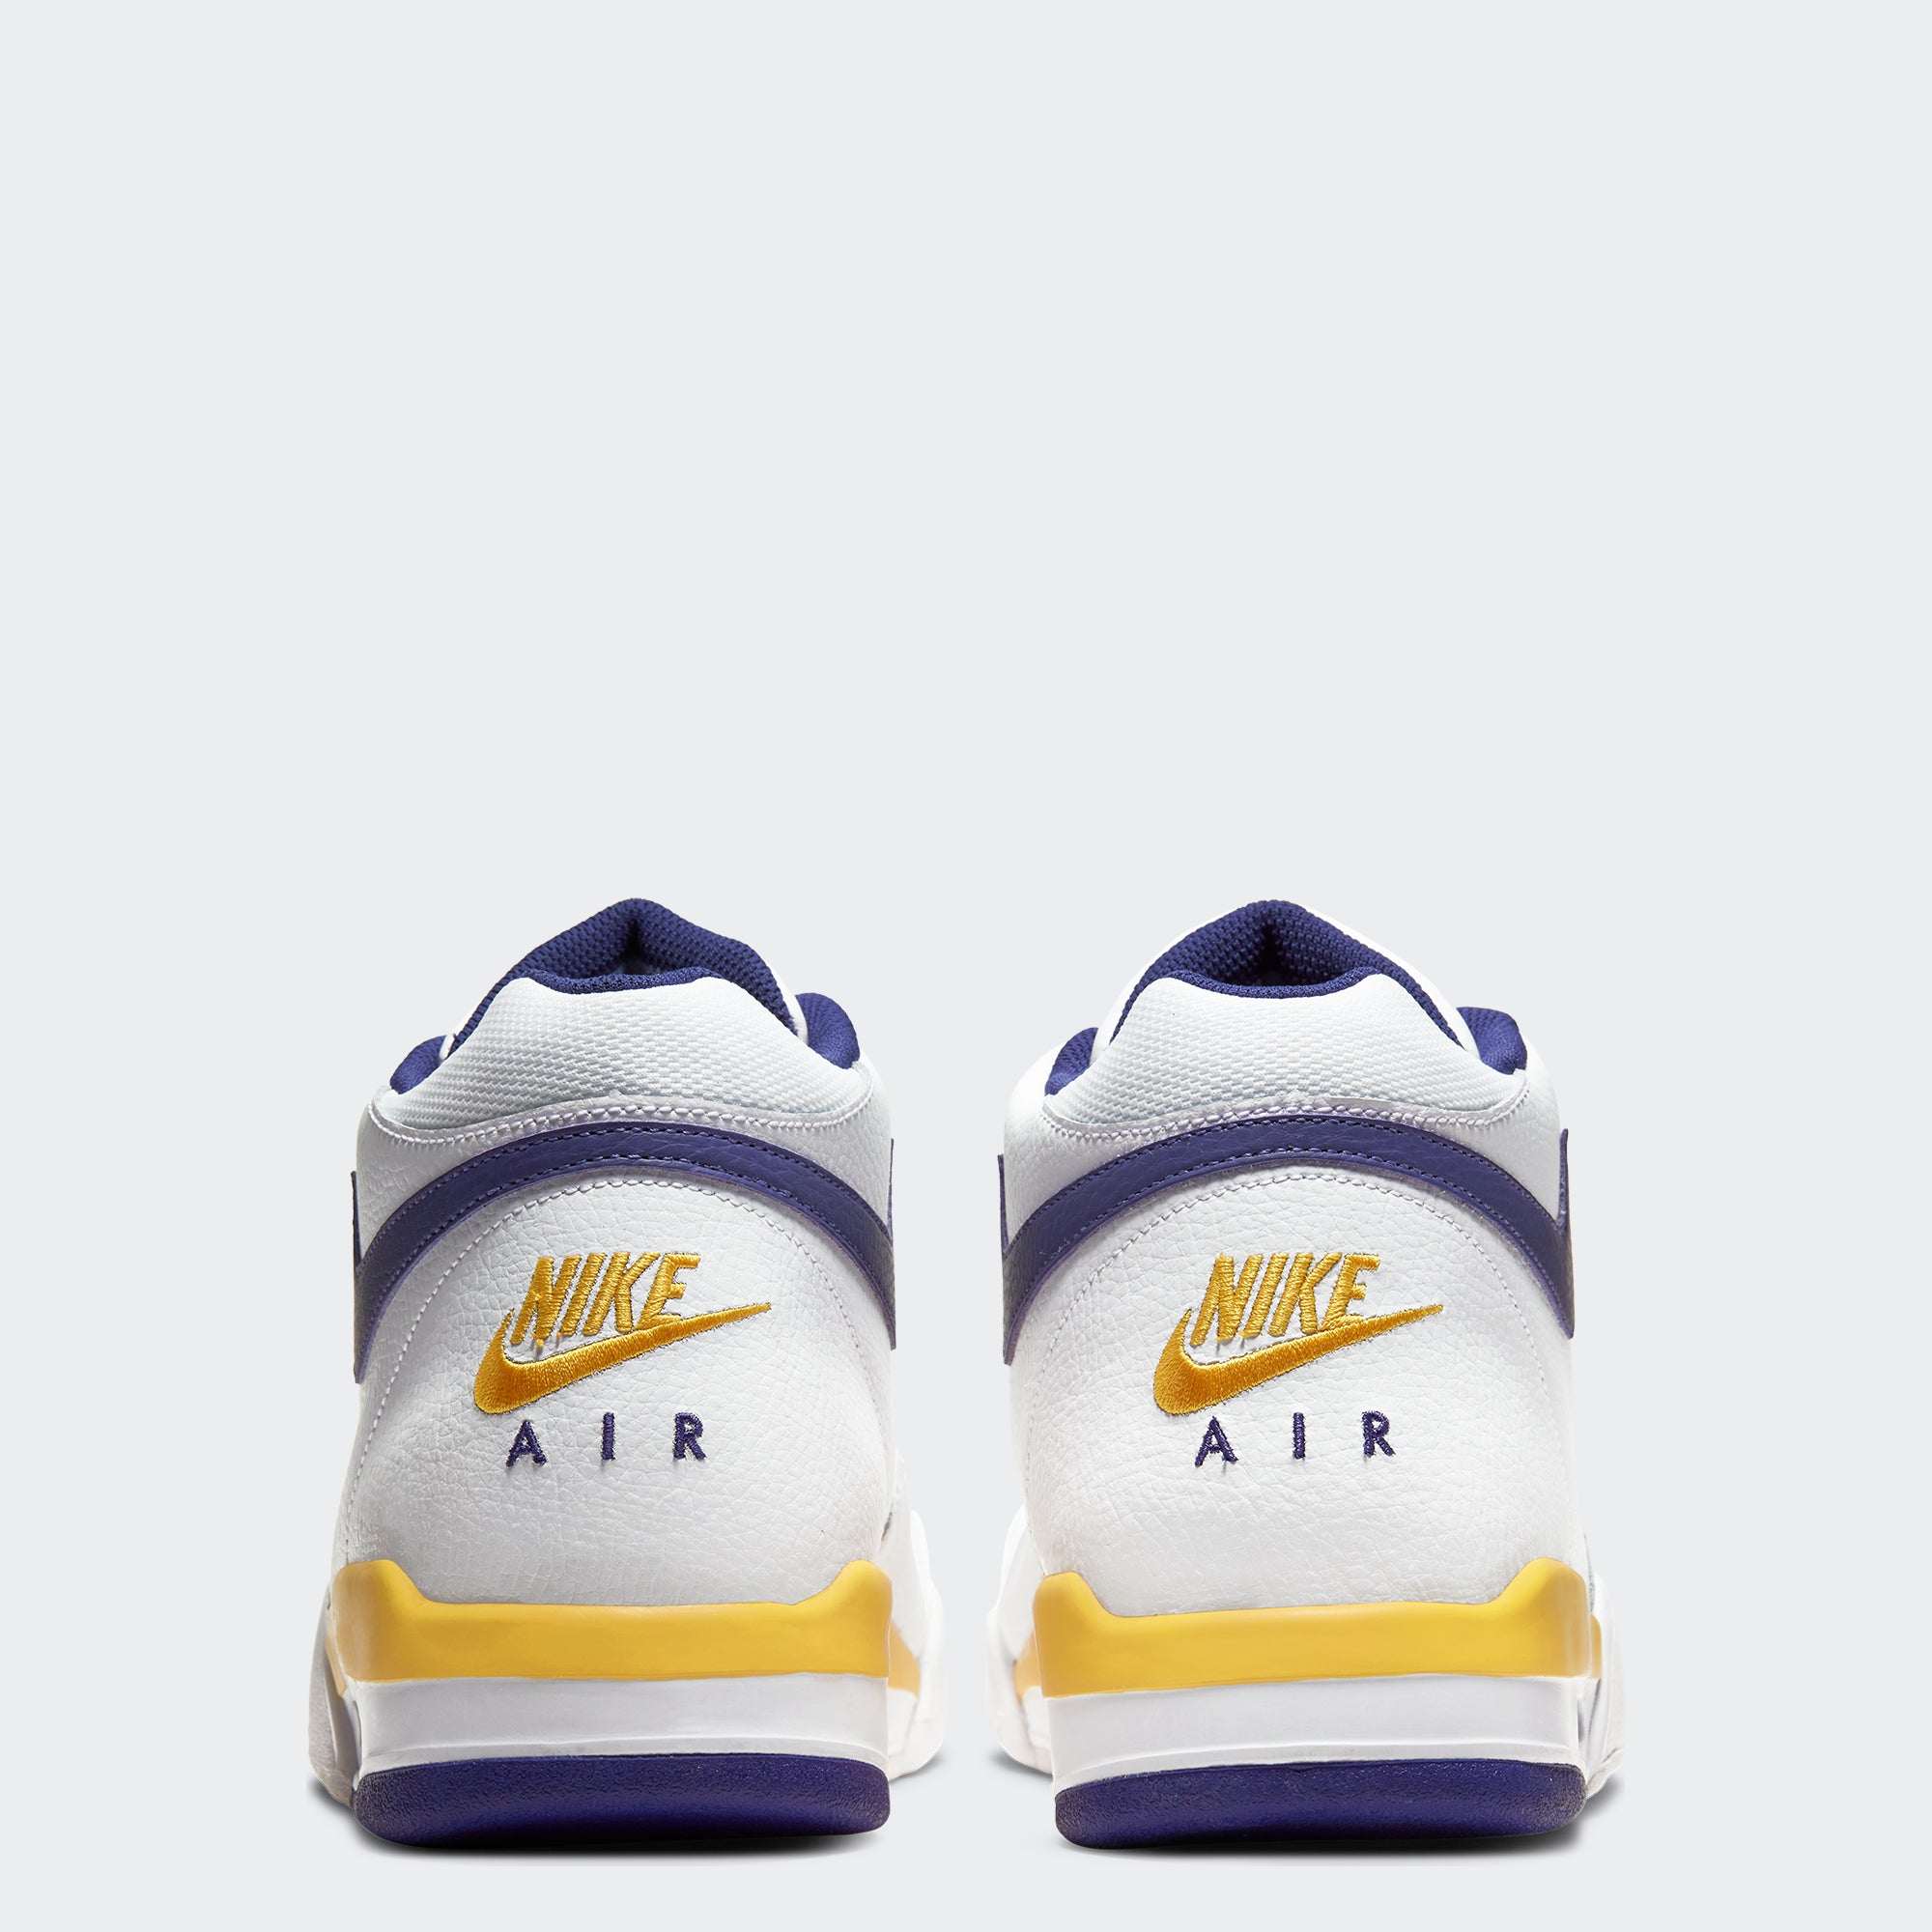 purple and gold tennis shoes